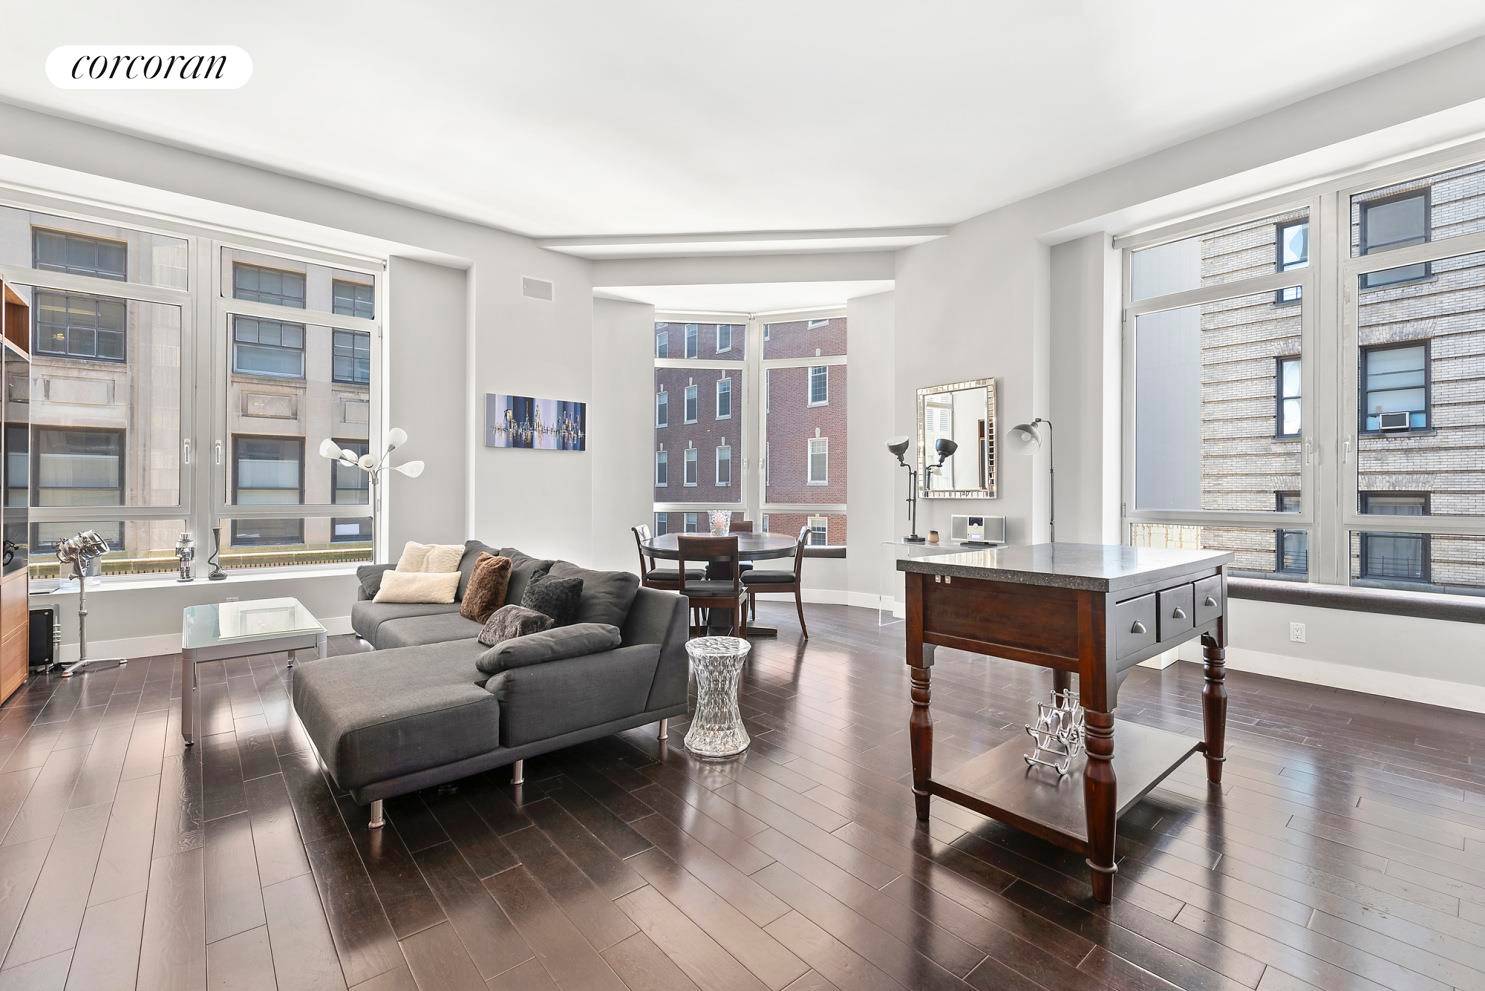 111 Fulton Street, Apt. 514 two bedrooms, 2 bathrooms modern and lofty home with 1, 312 SF of interior space, and located in a luxury condominium packed with curated amenities.